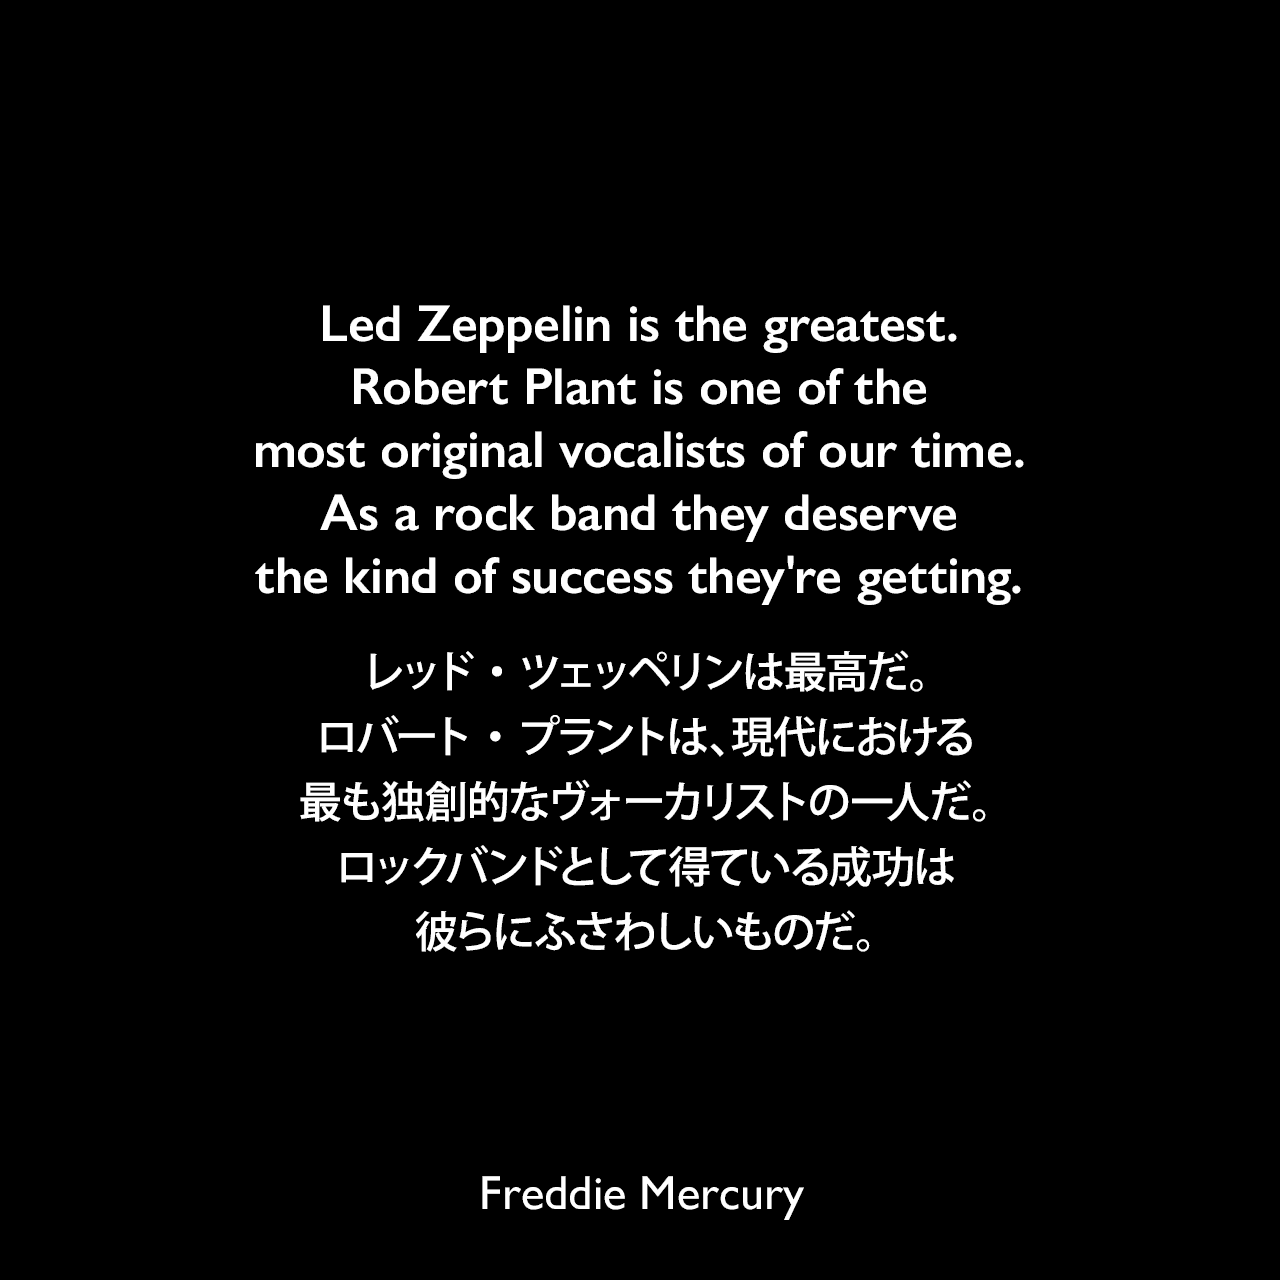 Led Zeppelin is the greatest. Robert Plant is one of the most original vocalists of our time. As a rock band they deserve the kind of success they're getting.レッド・ツェッペリンは最高だ。ロバート・プラントは、現代における最も独創的なヴォーカリストの一人だ。ロックバンドとして得ている成功は彼らにふさわしいものだ。- 1975年4月、ロック専門雑誌サーカスよりFreddie Mercury